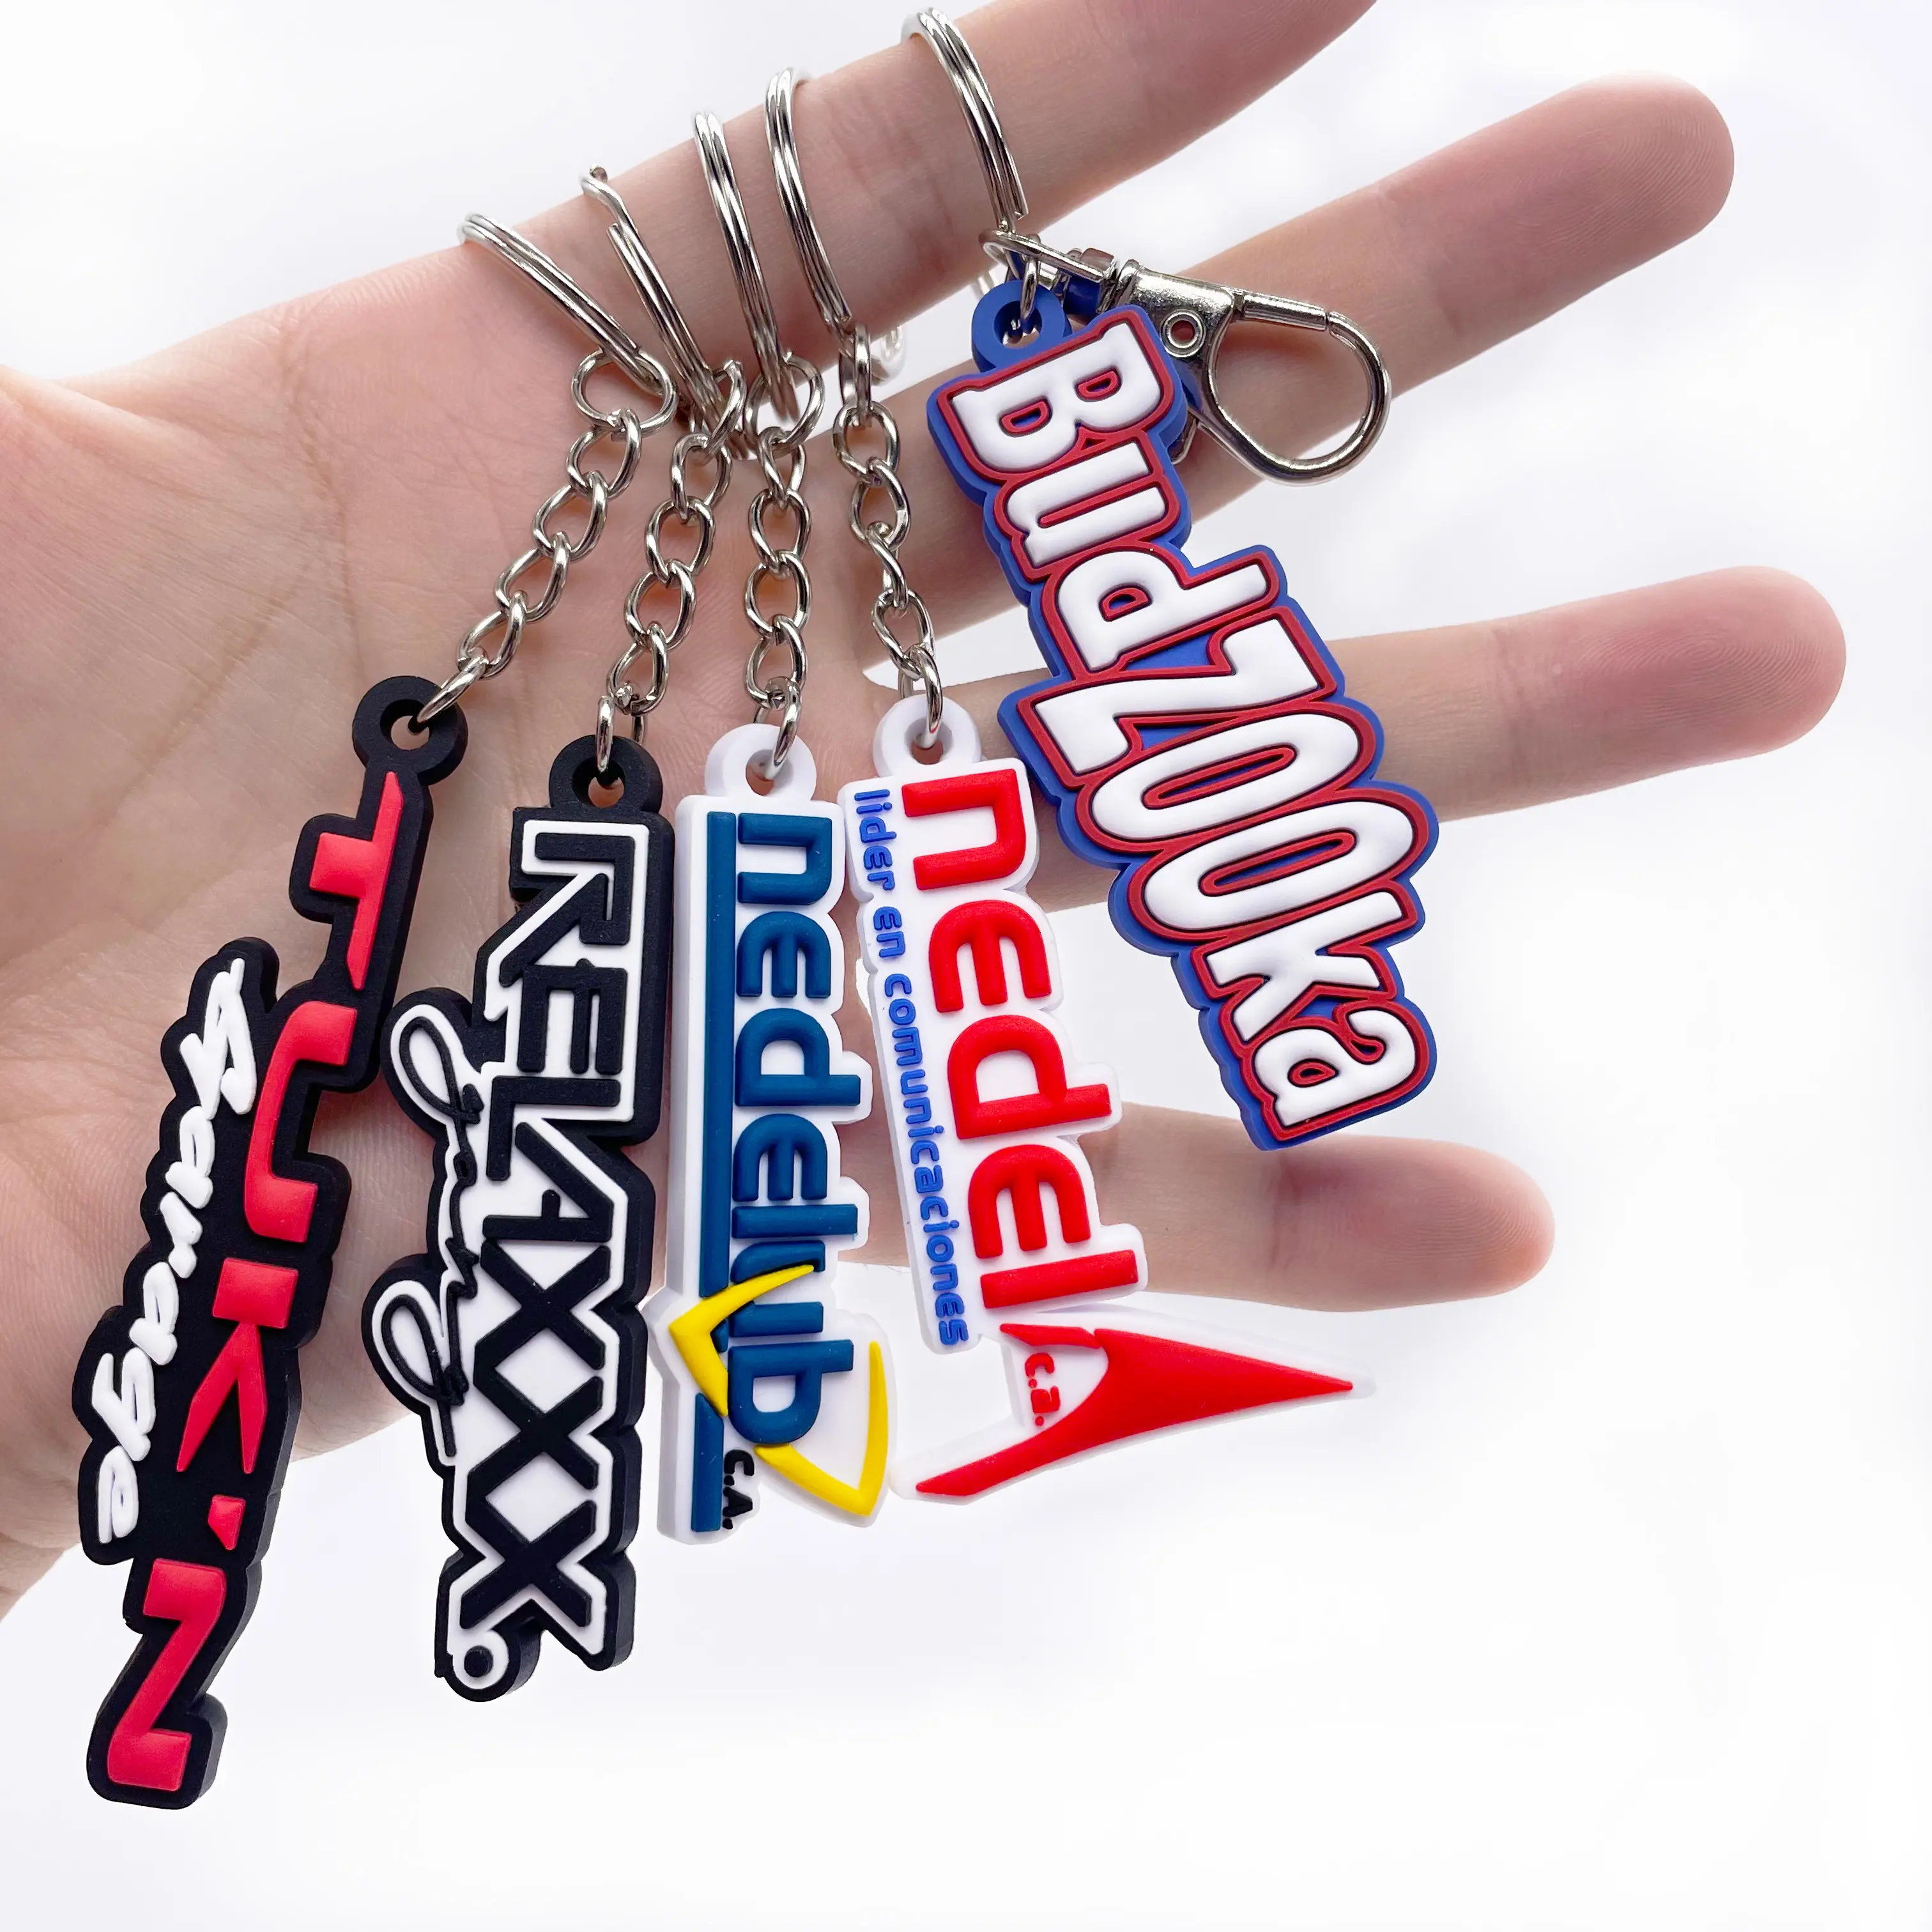 Creative Custom 2D/3D PVC soft Rubber personalized Key ring Make With Promotional Gift Rubber Custom Key chain